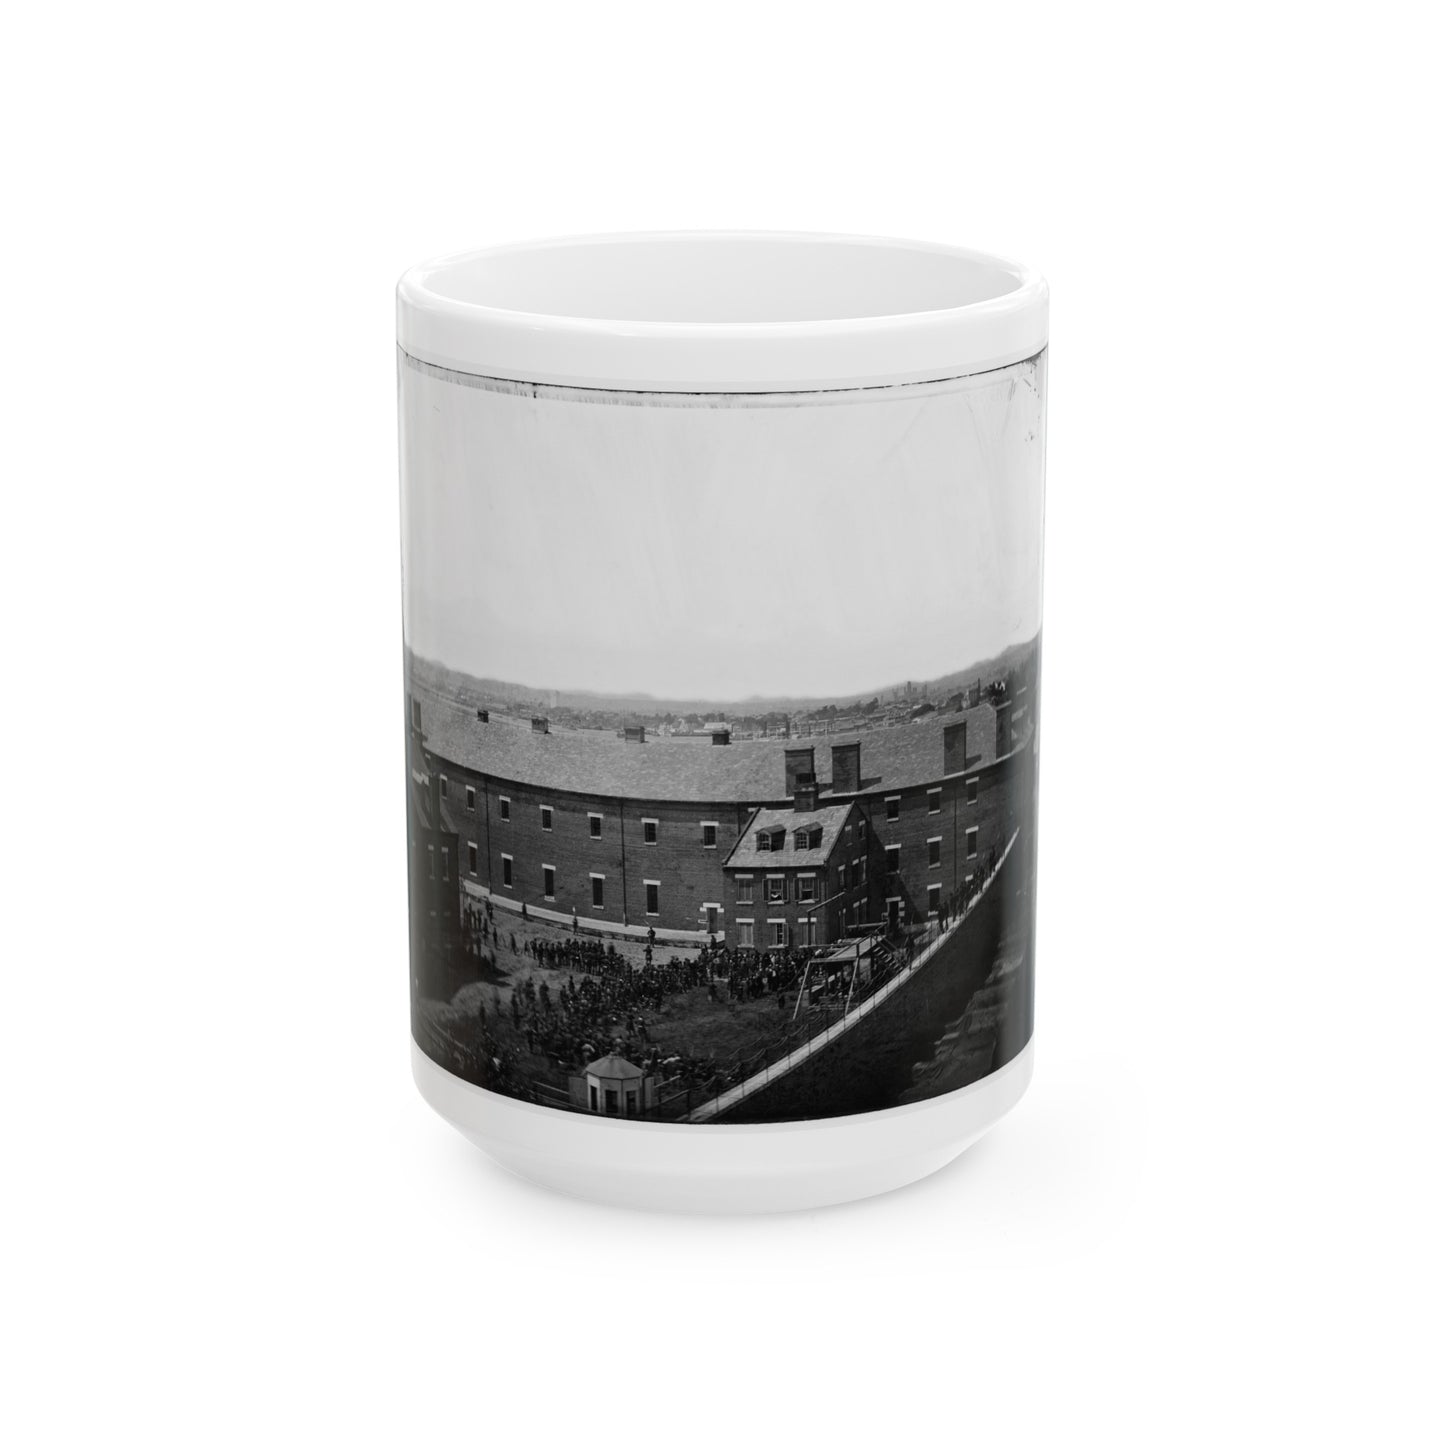 Washington, D.C. Execution Of The Conspirators  Scaffold In Use And Crowd In The Yard, Seen From The Roof Of The Arsenal (U.S. Civil War) White Coffee Mug